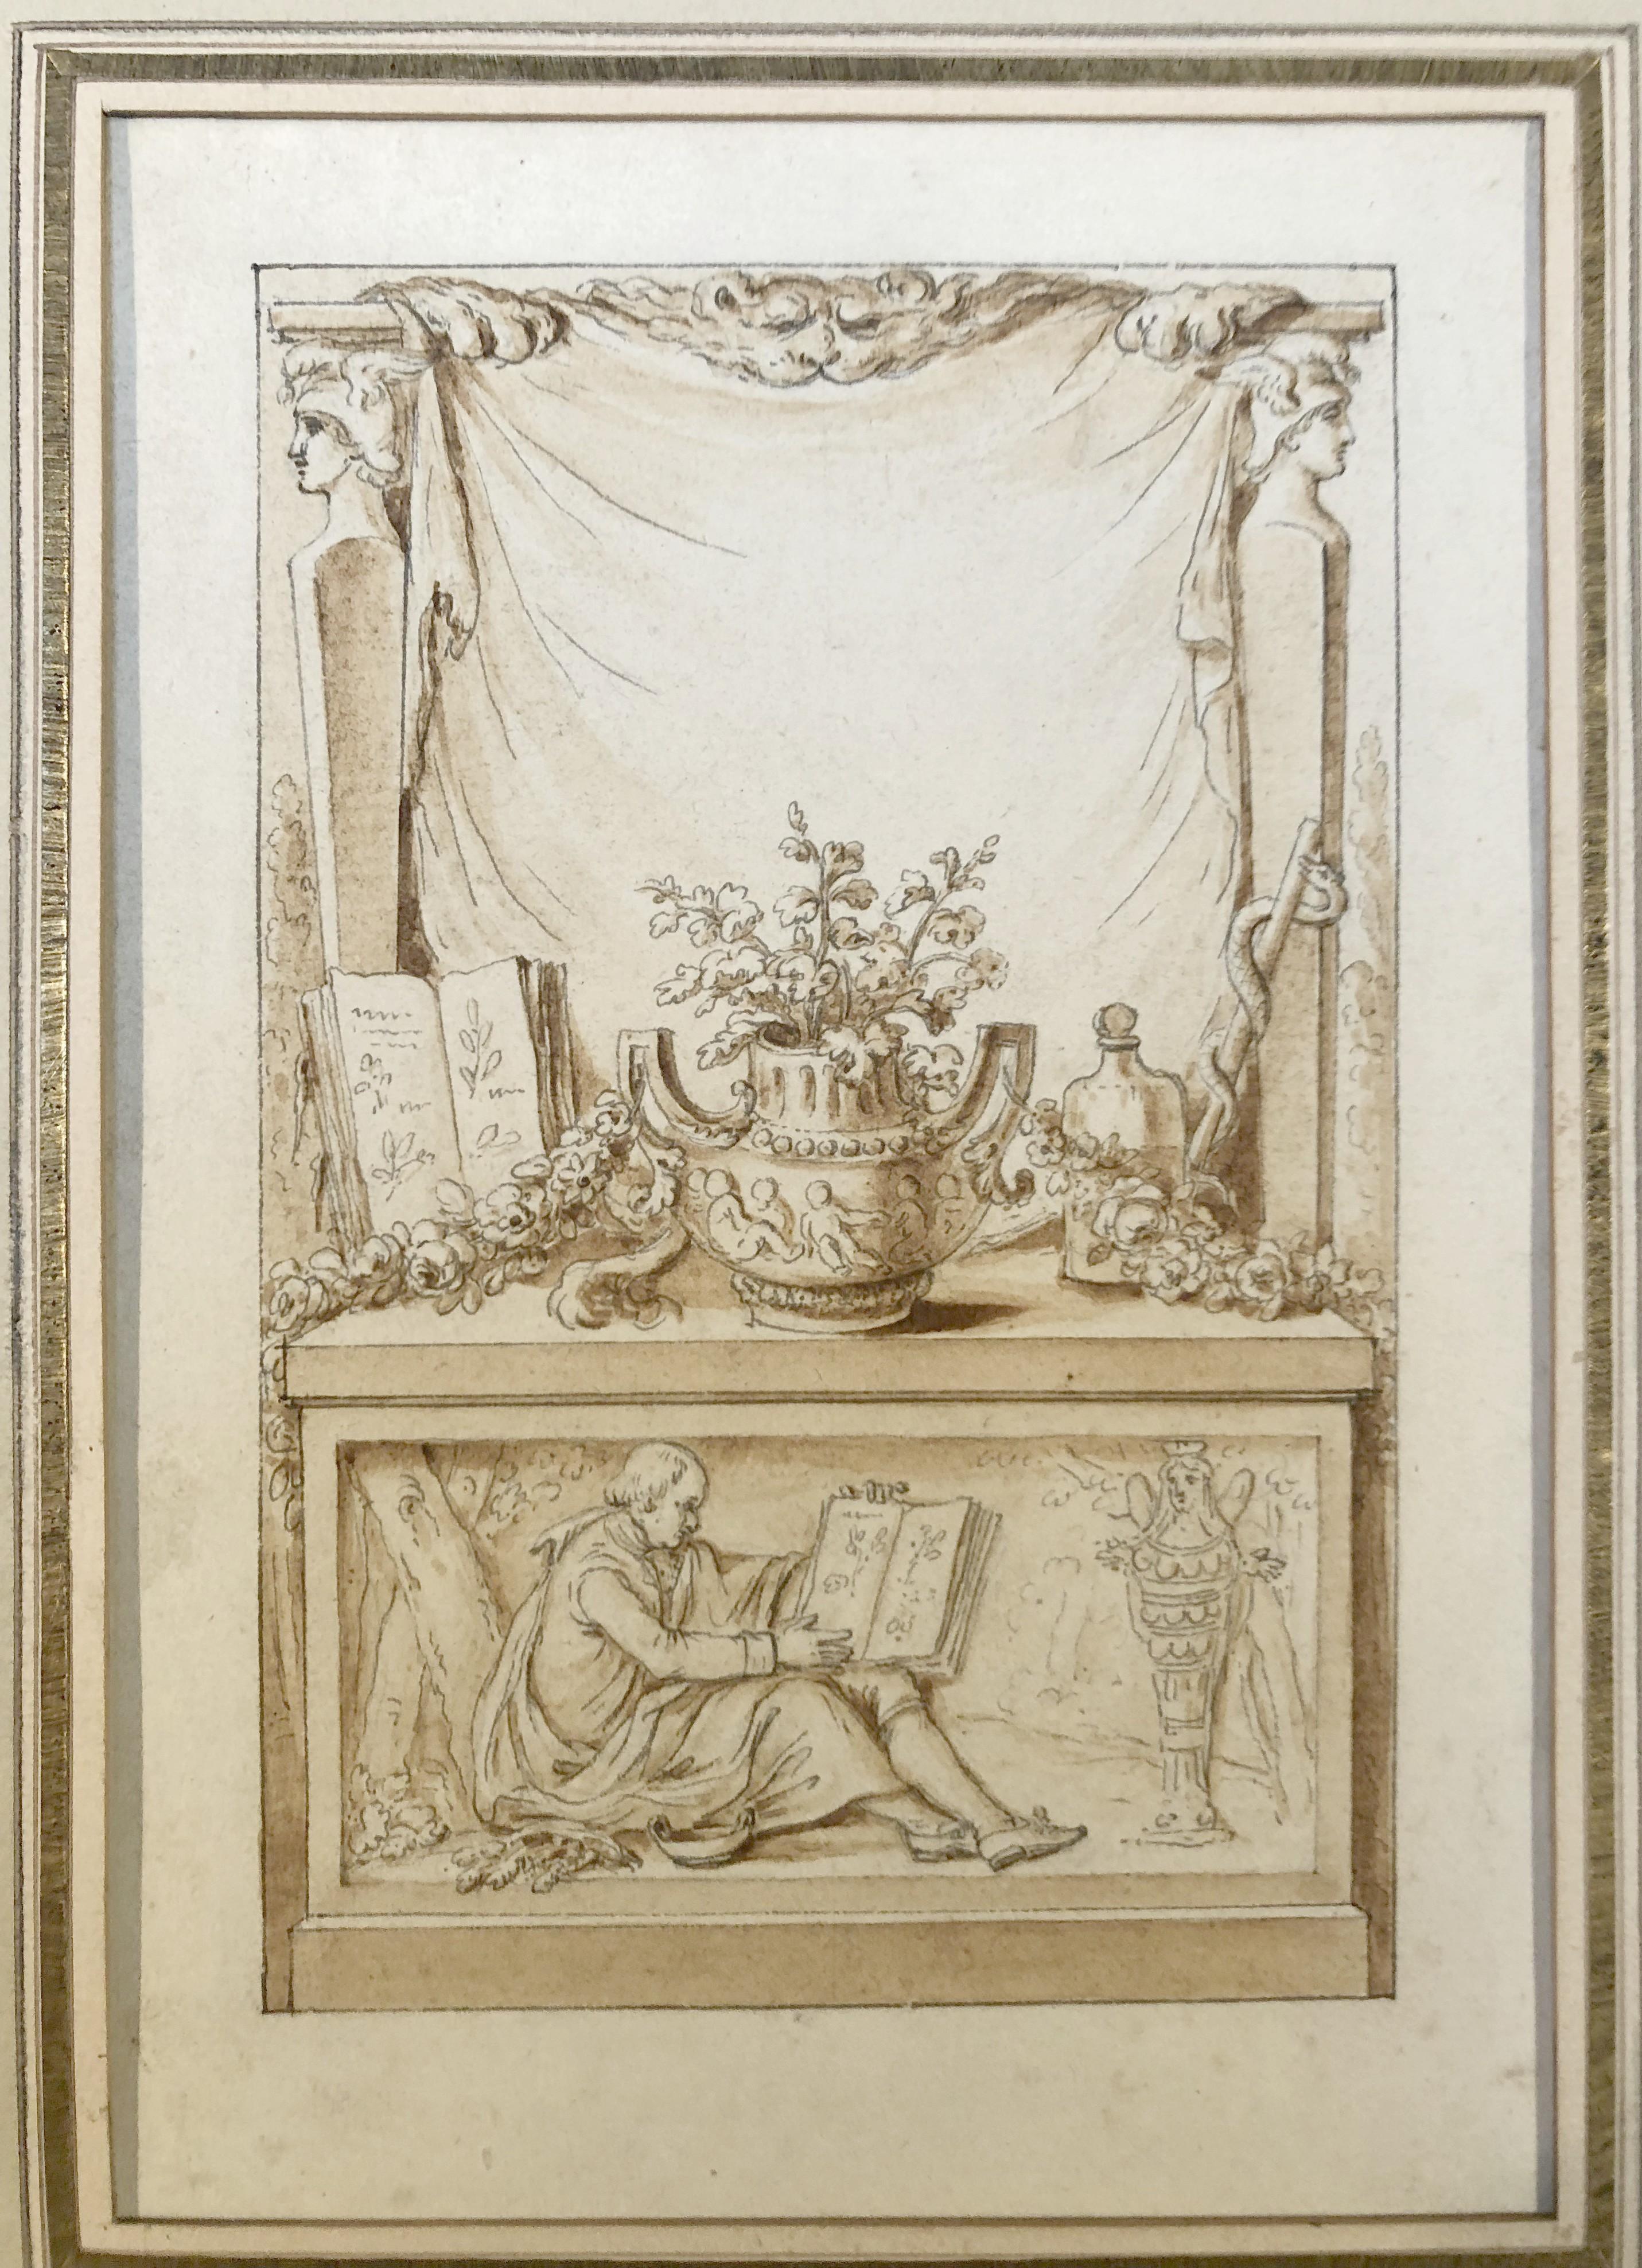 18th century French Neo Classical school, Study for frontispiece, drawing - Art by Unknown